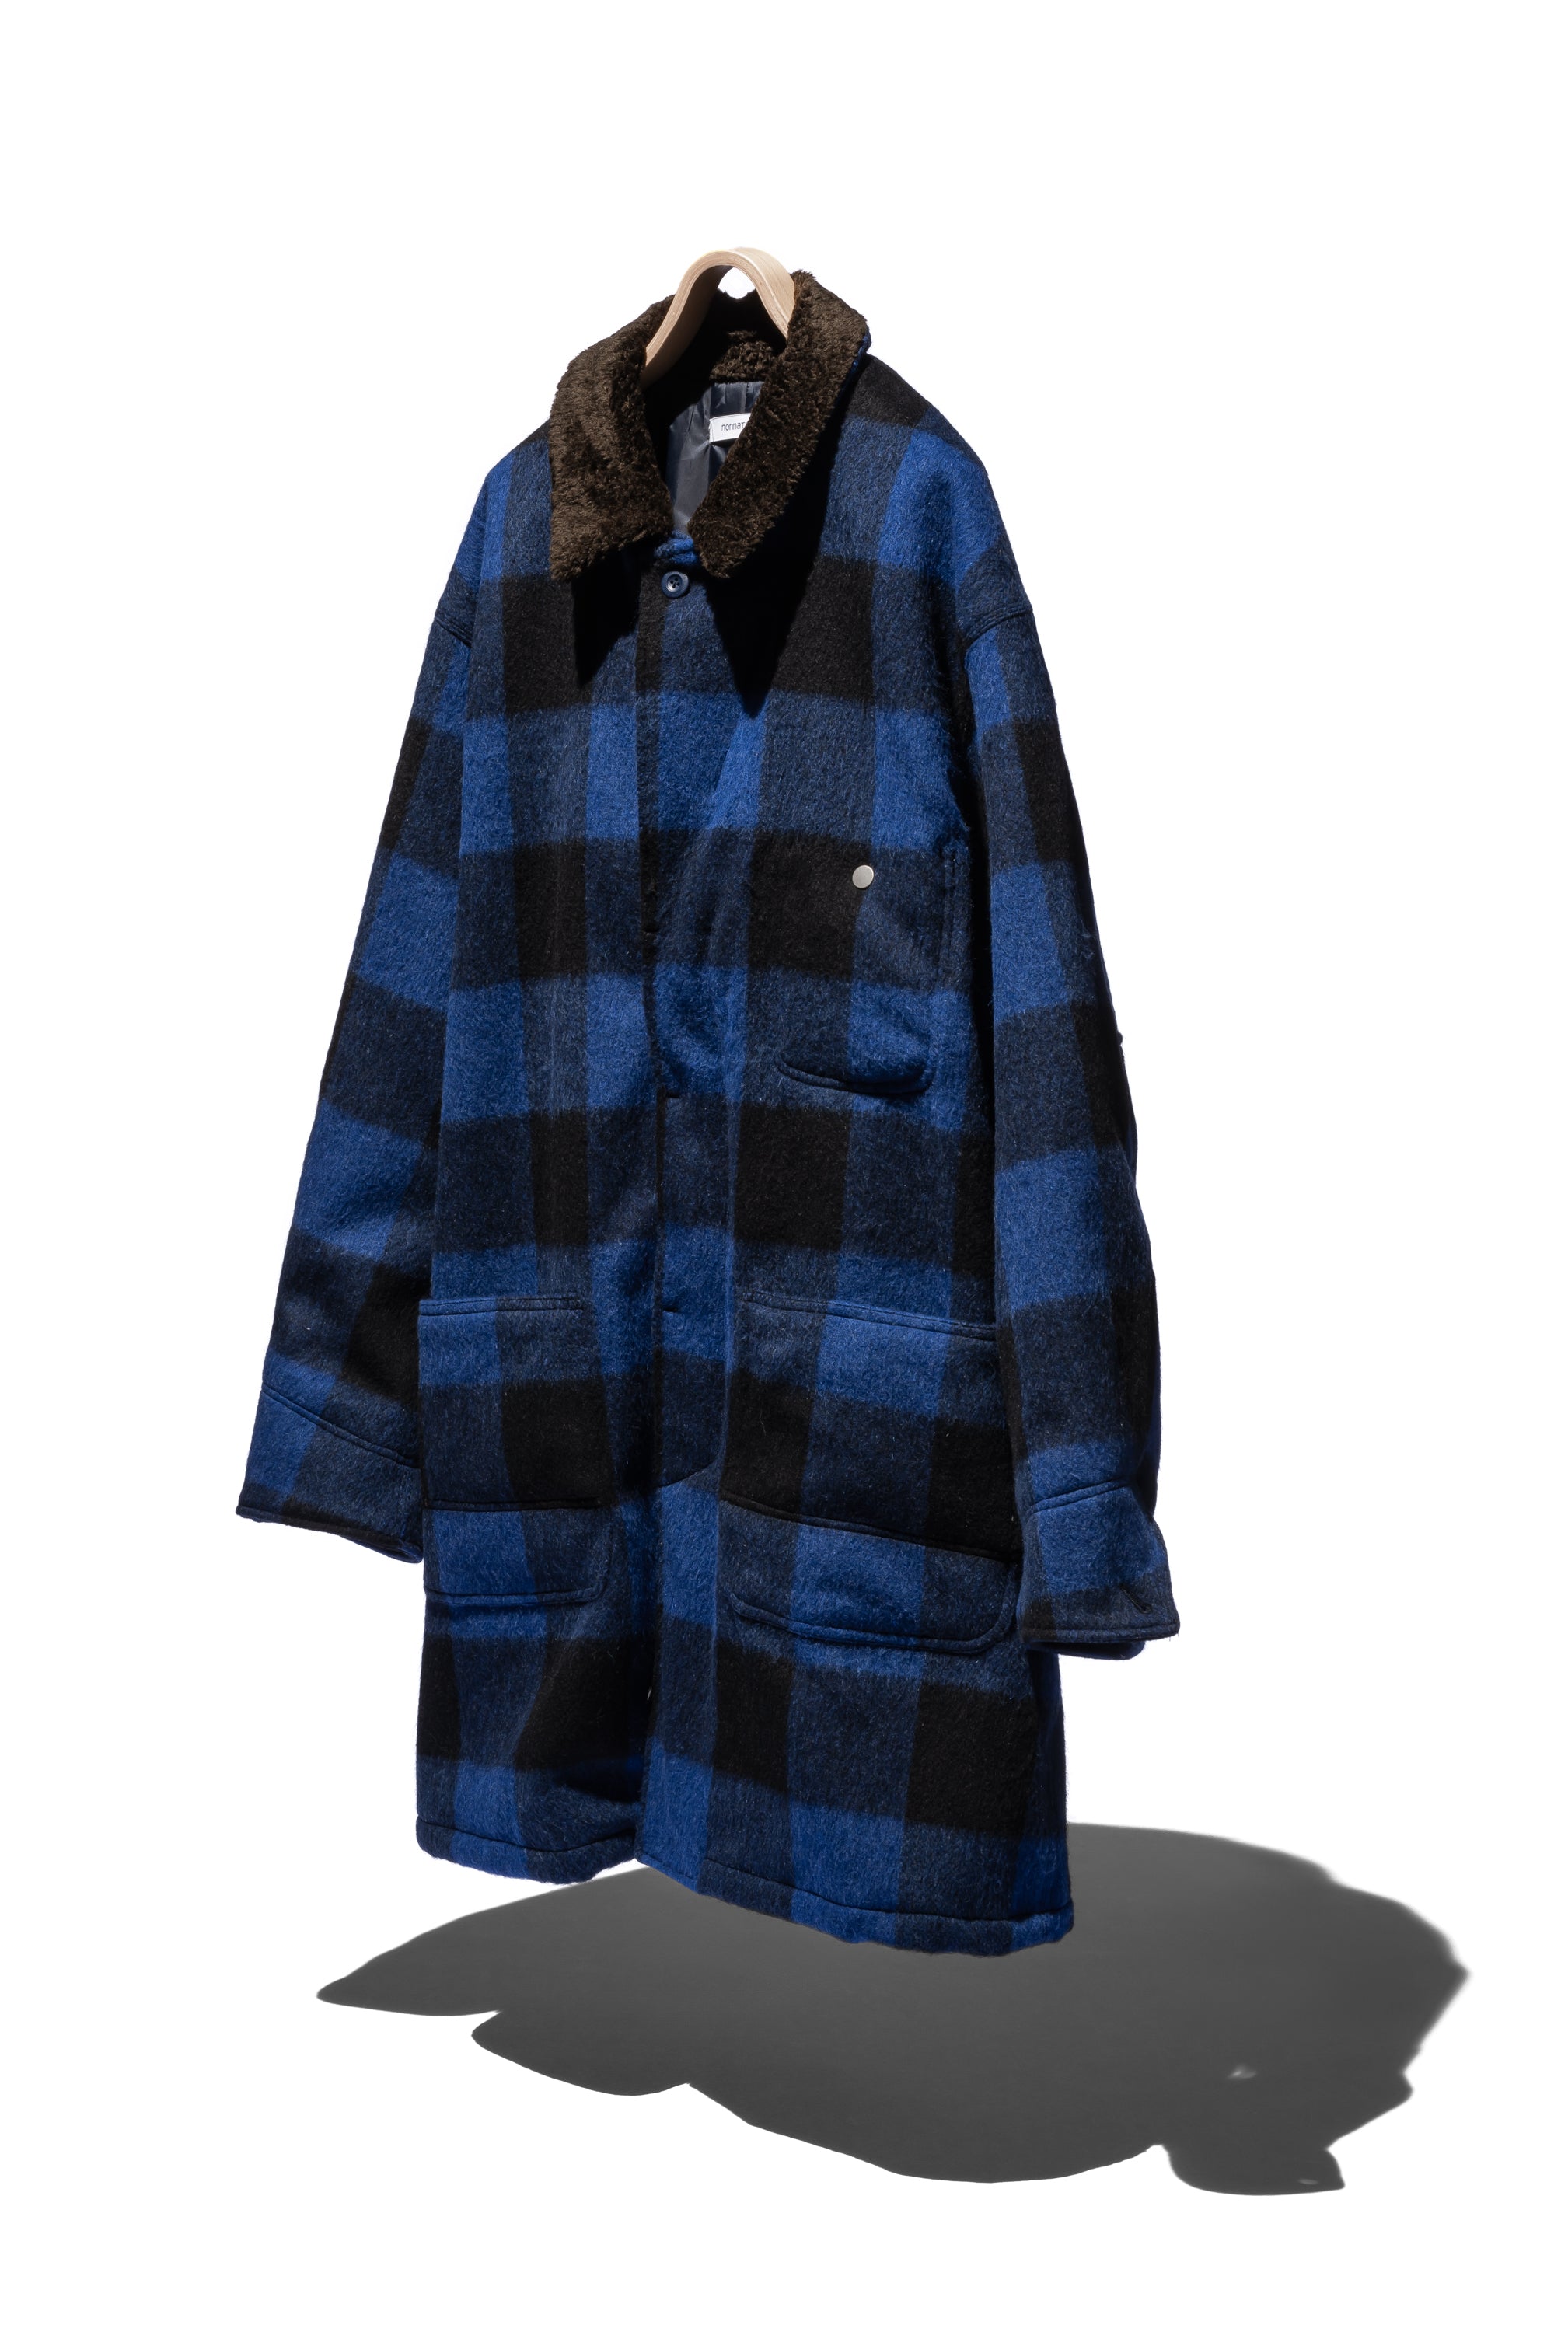 Rancher Long Coat W/P/N/A Wool Dobby Buffalo Check with GORE-TEX Windstopper